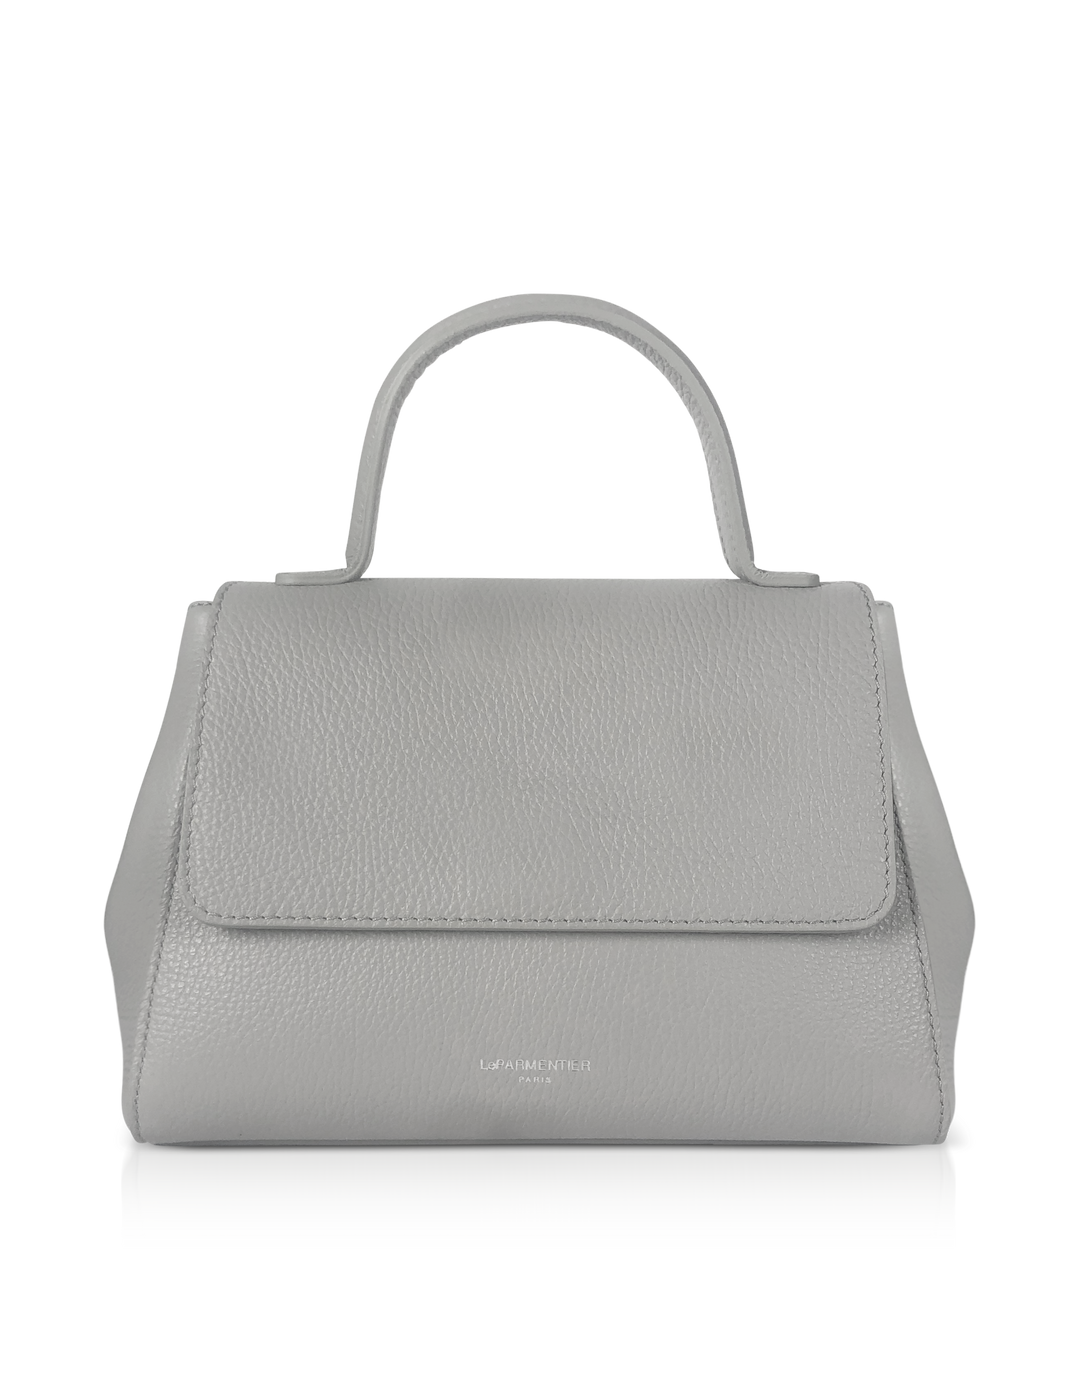 Gray leather handbag with top handle and flap closure